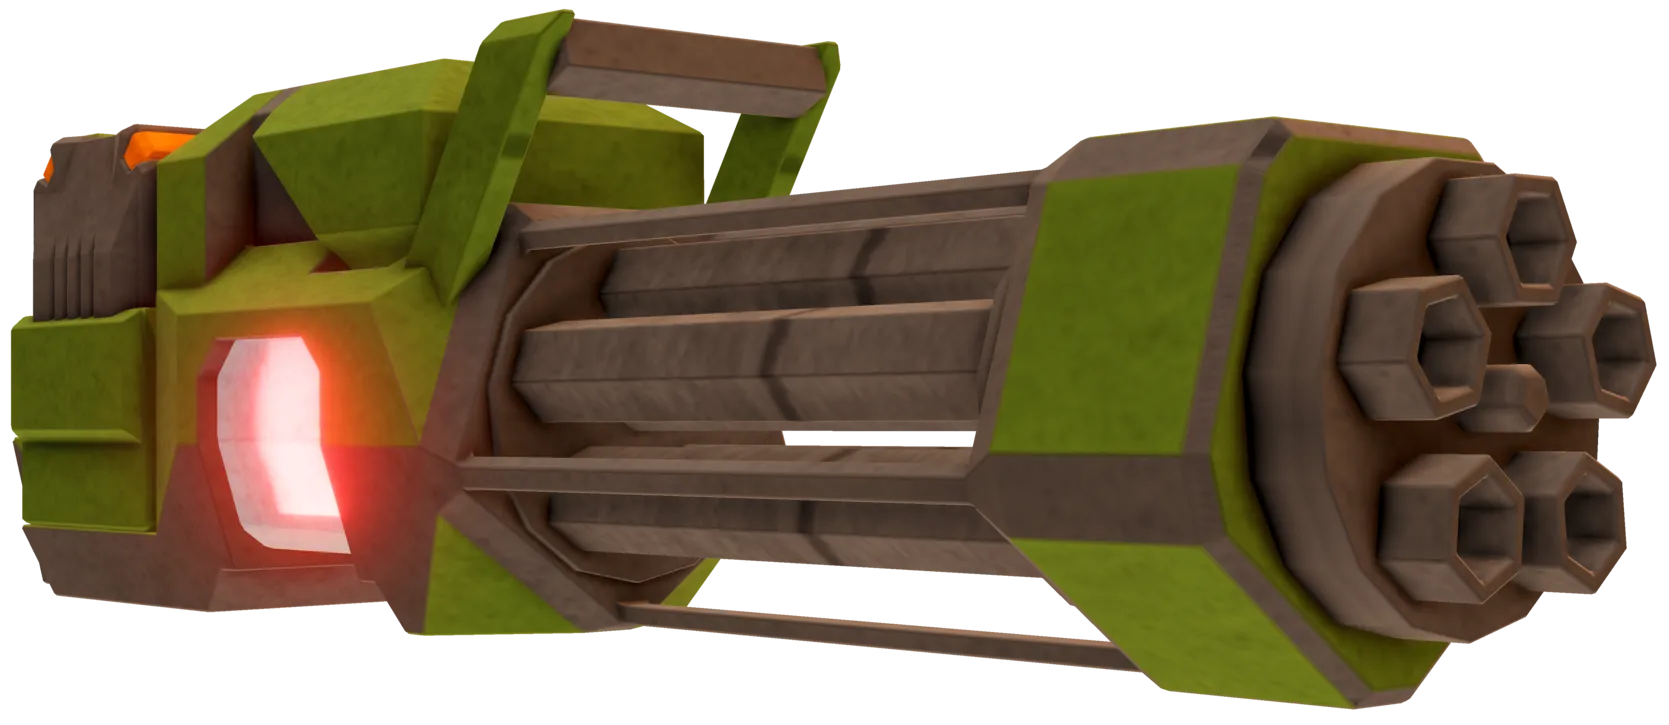 A matte green laser minigun with rotating barrel and a glowing red section underneath.